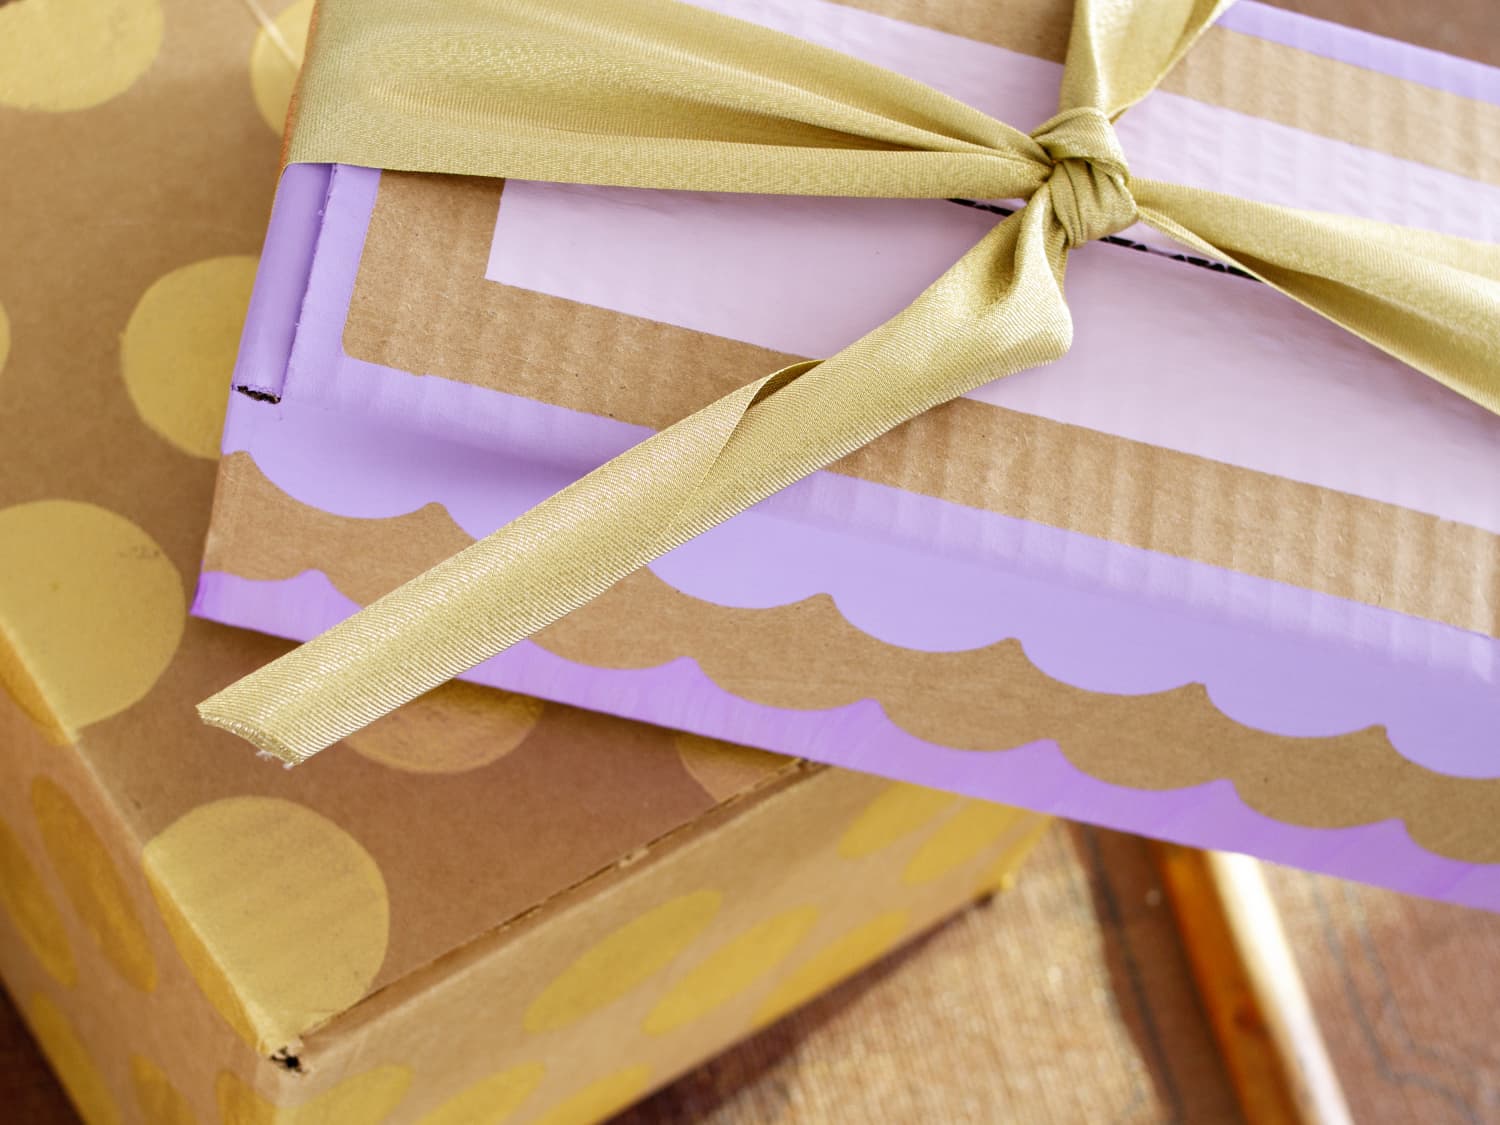 Instructions for Making Gift Boxes